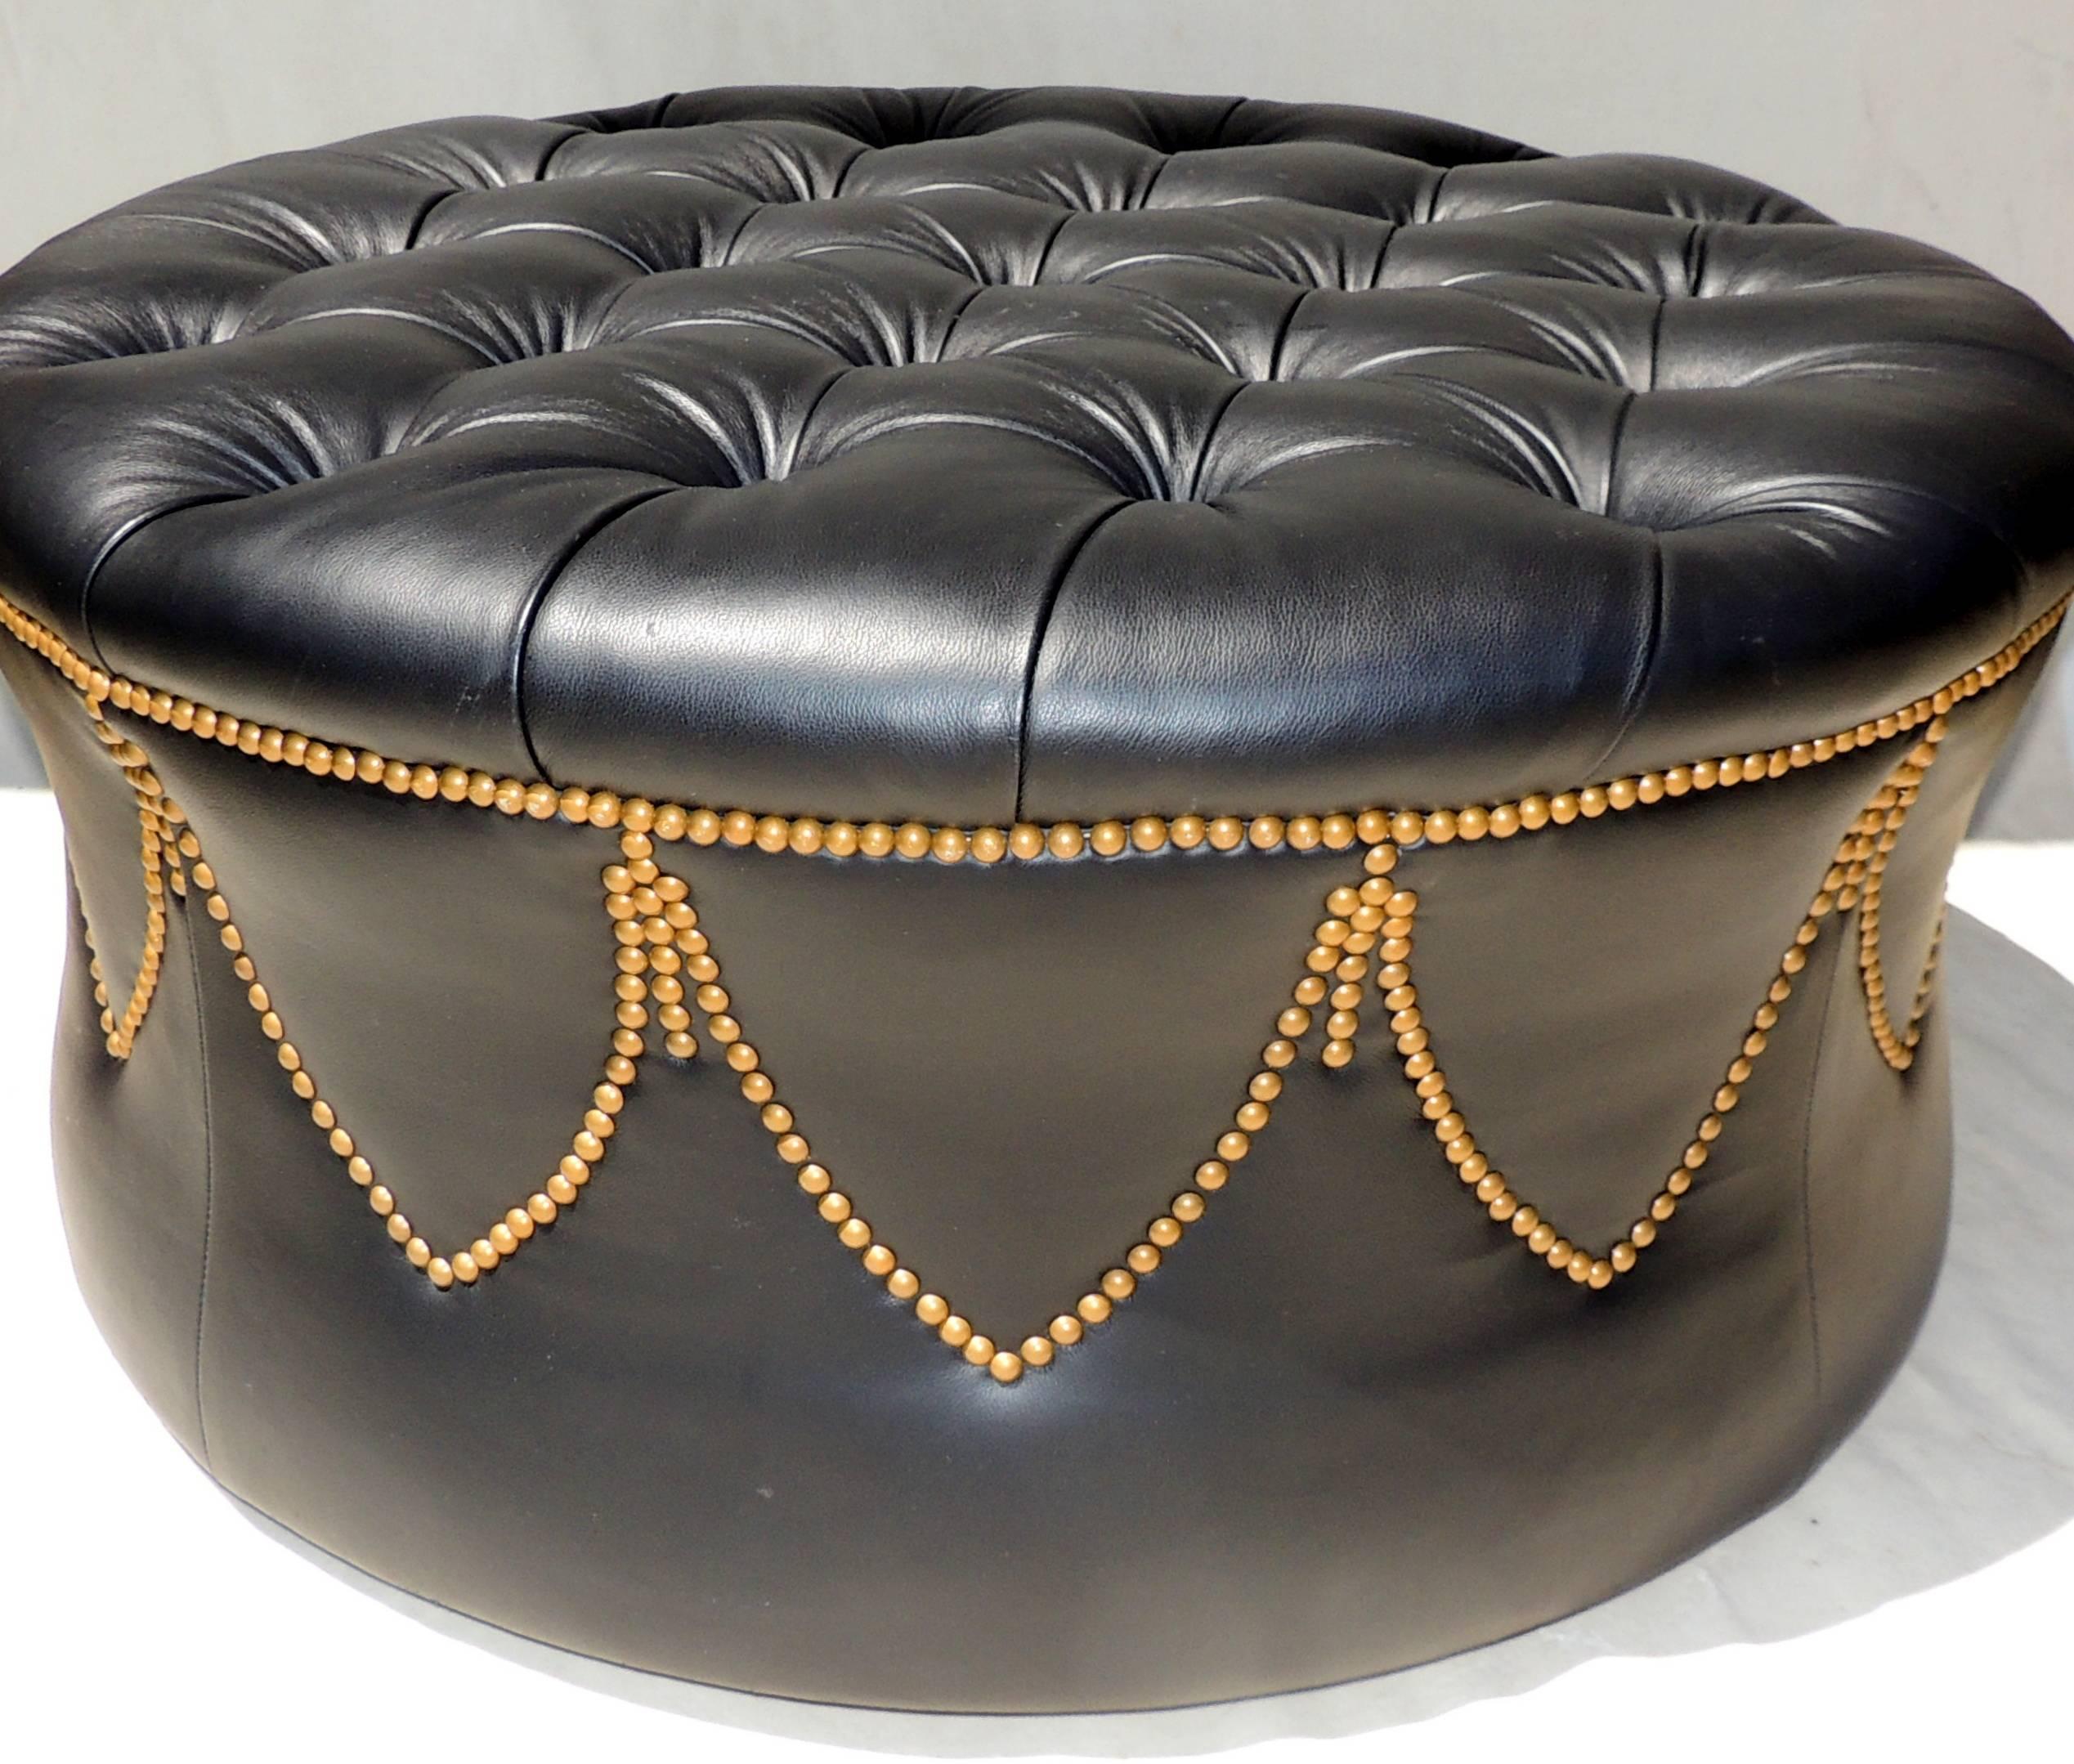 A handsome black leather leatherette brass nailhead tufted puff ottoman round bench footrest, great for any space.